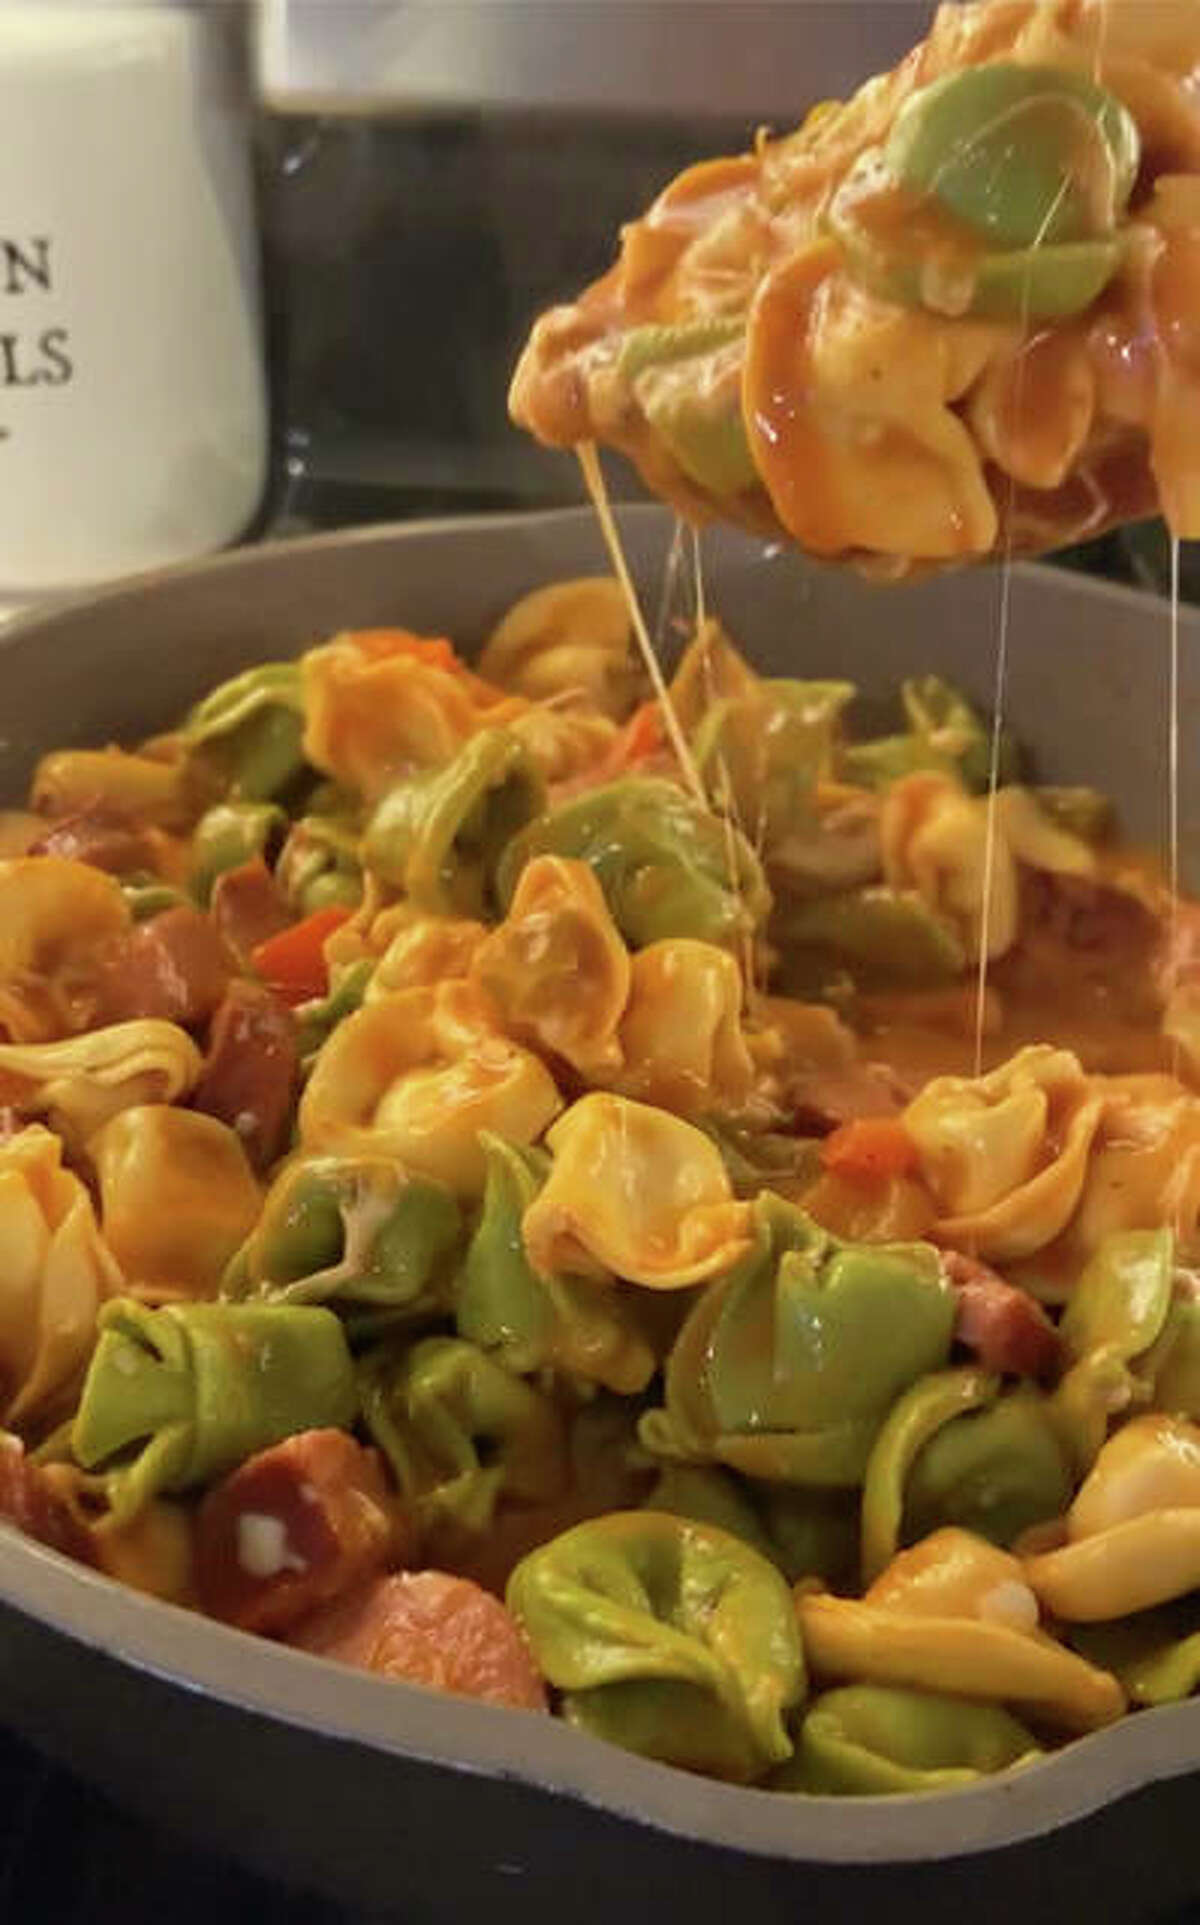 Sausage and tortellini dish is a one-skillet meal packed with cheese and crunchy peppers.